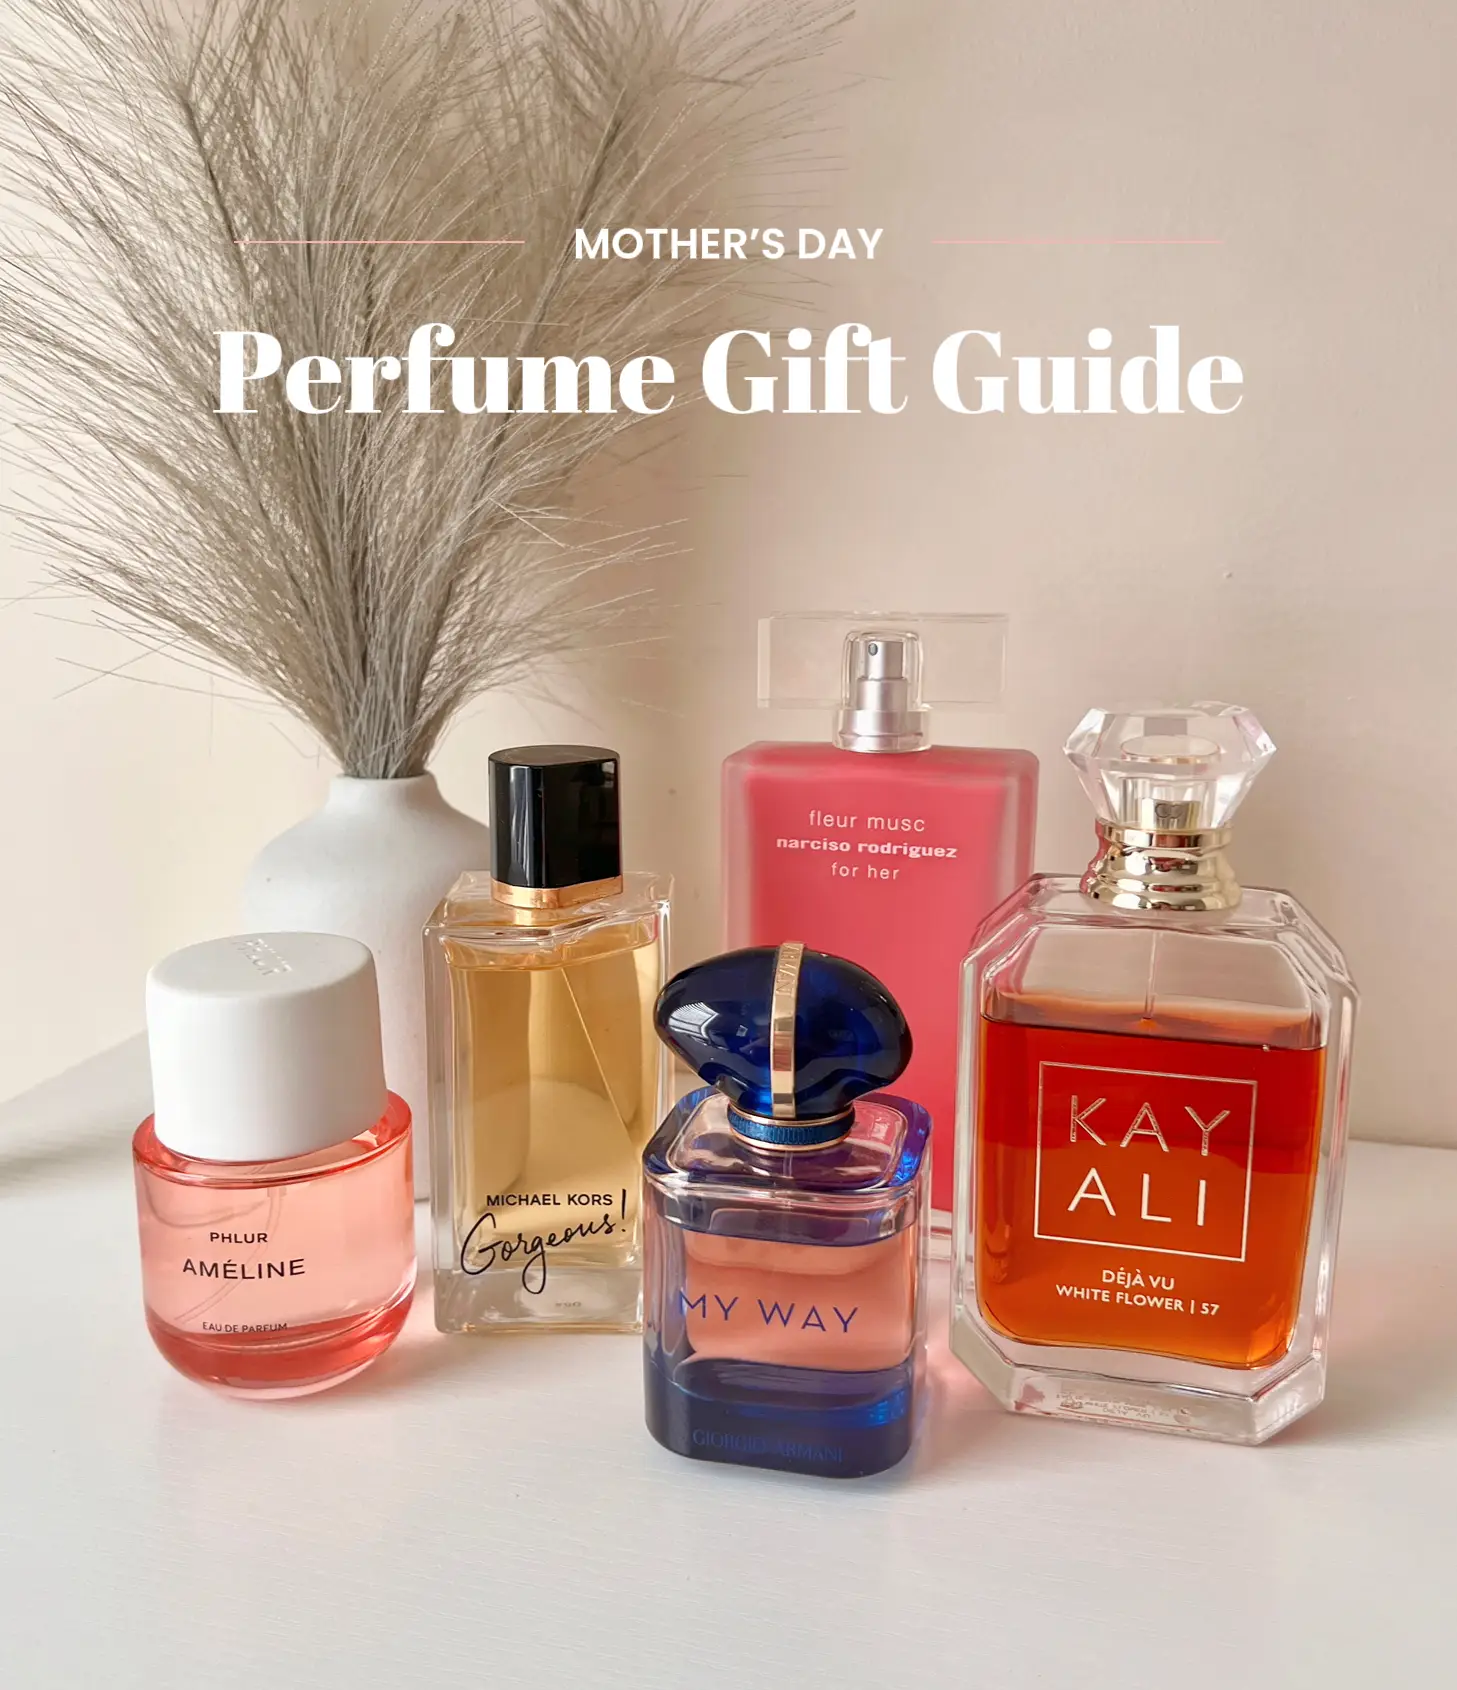 TOP 10 BEST PERFUME GIFTS FOR WOMEN 🎁, FRAGRANCE CHRISTMAS GIFT GUIDE